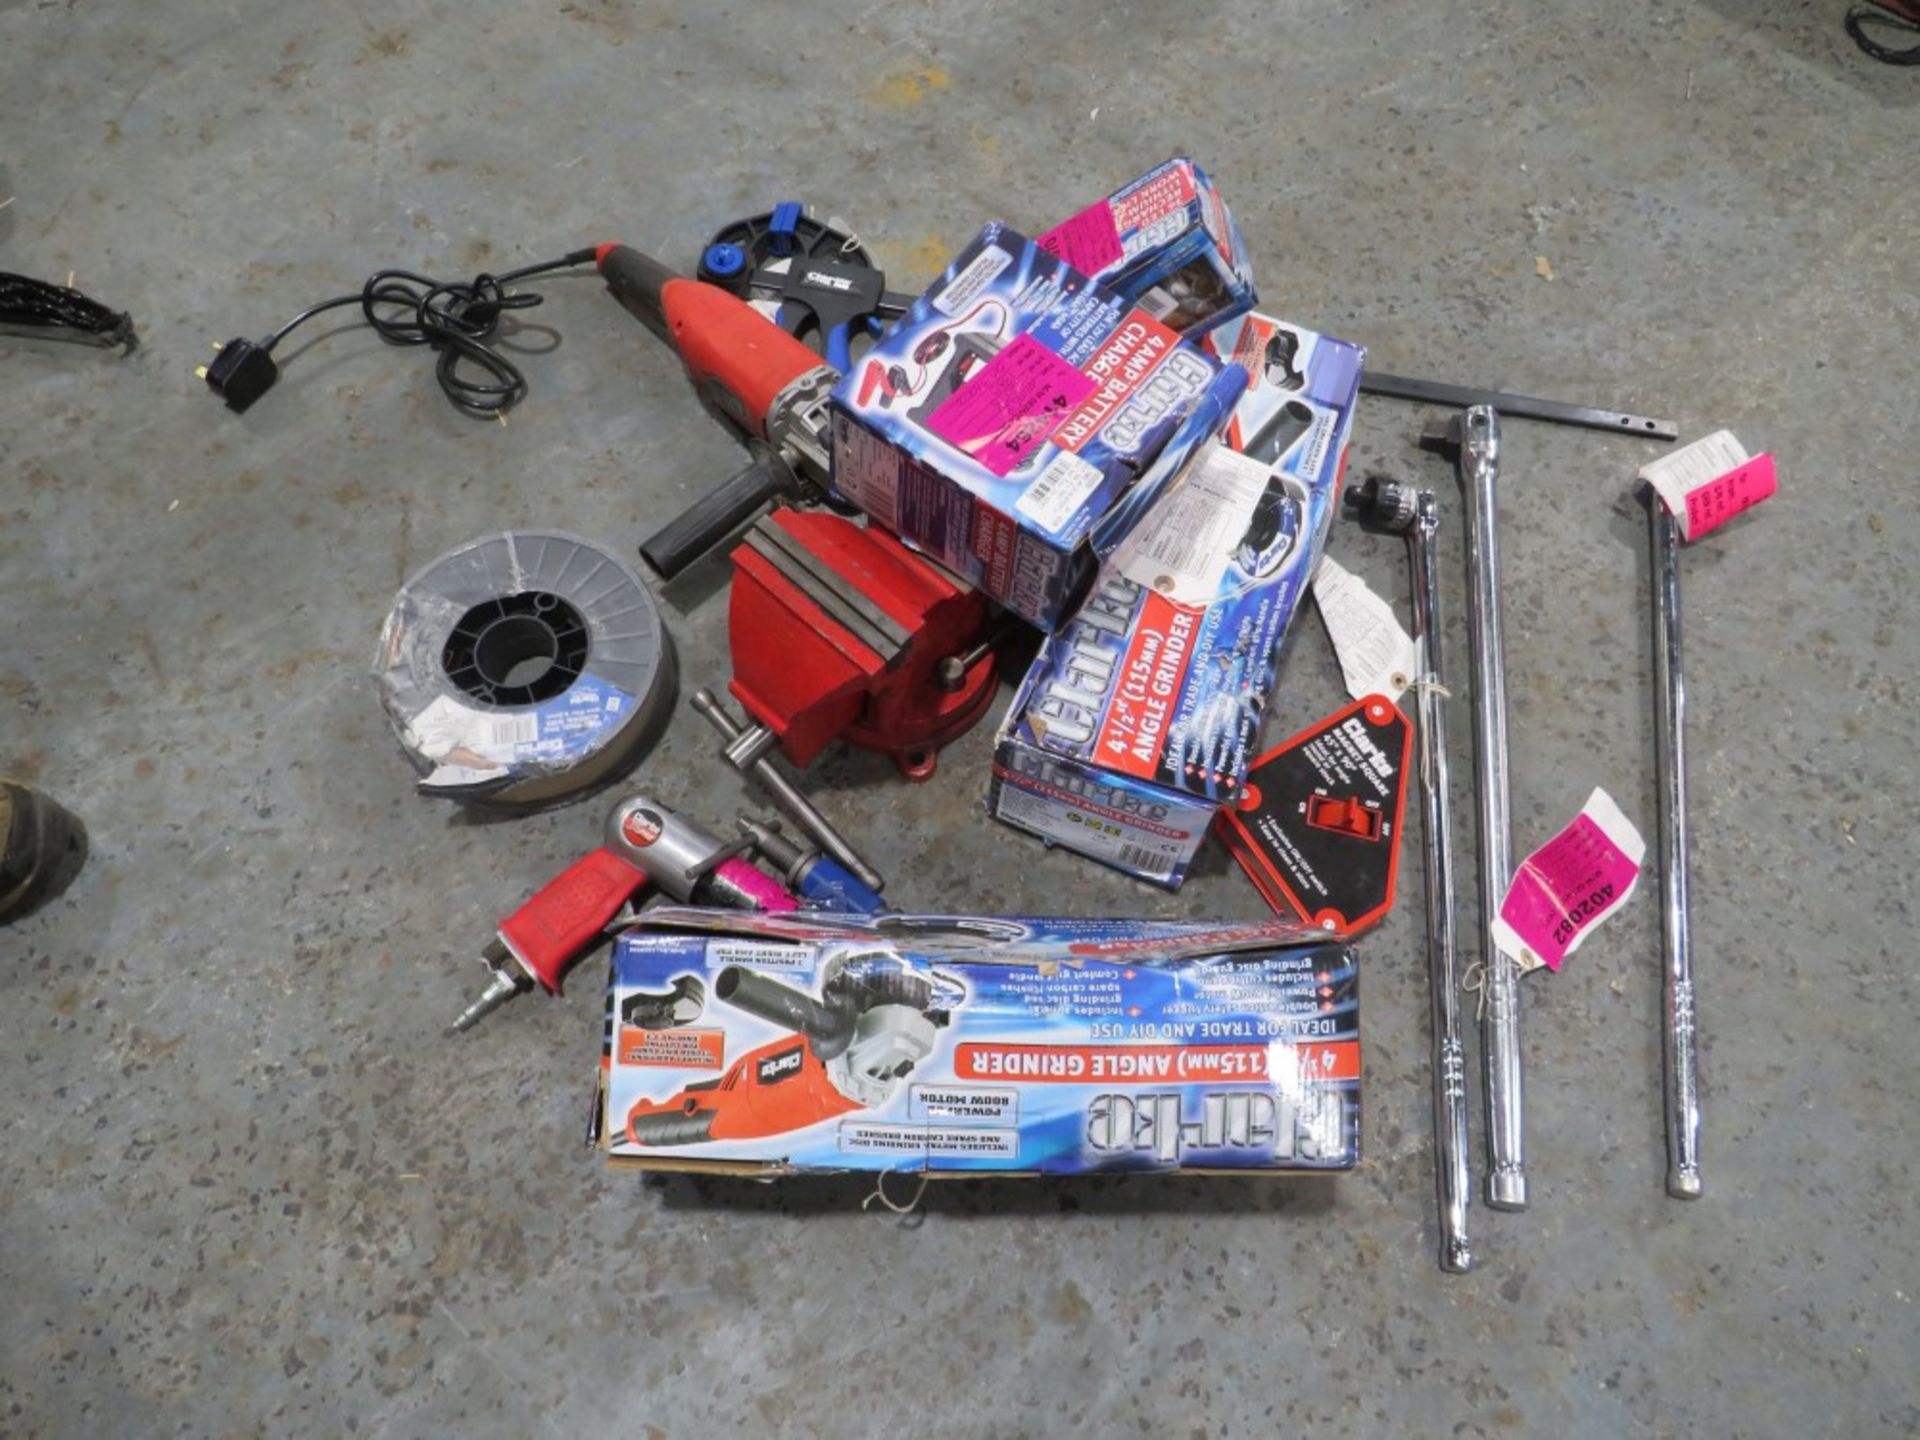 NEEDLE SCALER, WELDING WIRE, BATTERY CHARGER, WORK LIGHT, MAGNETIC SQUARE, 3 x BREAKER BAR, SPREADER